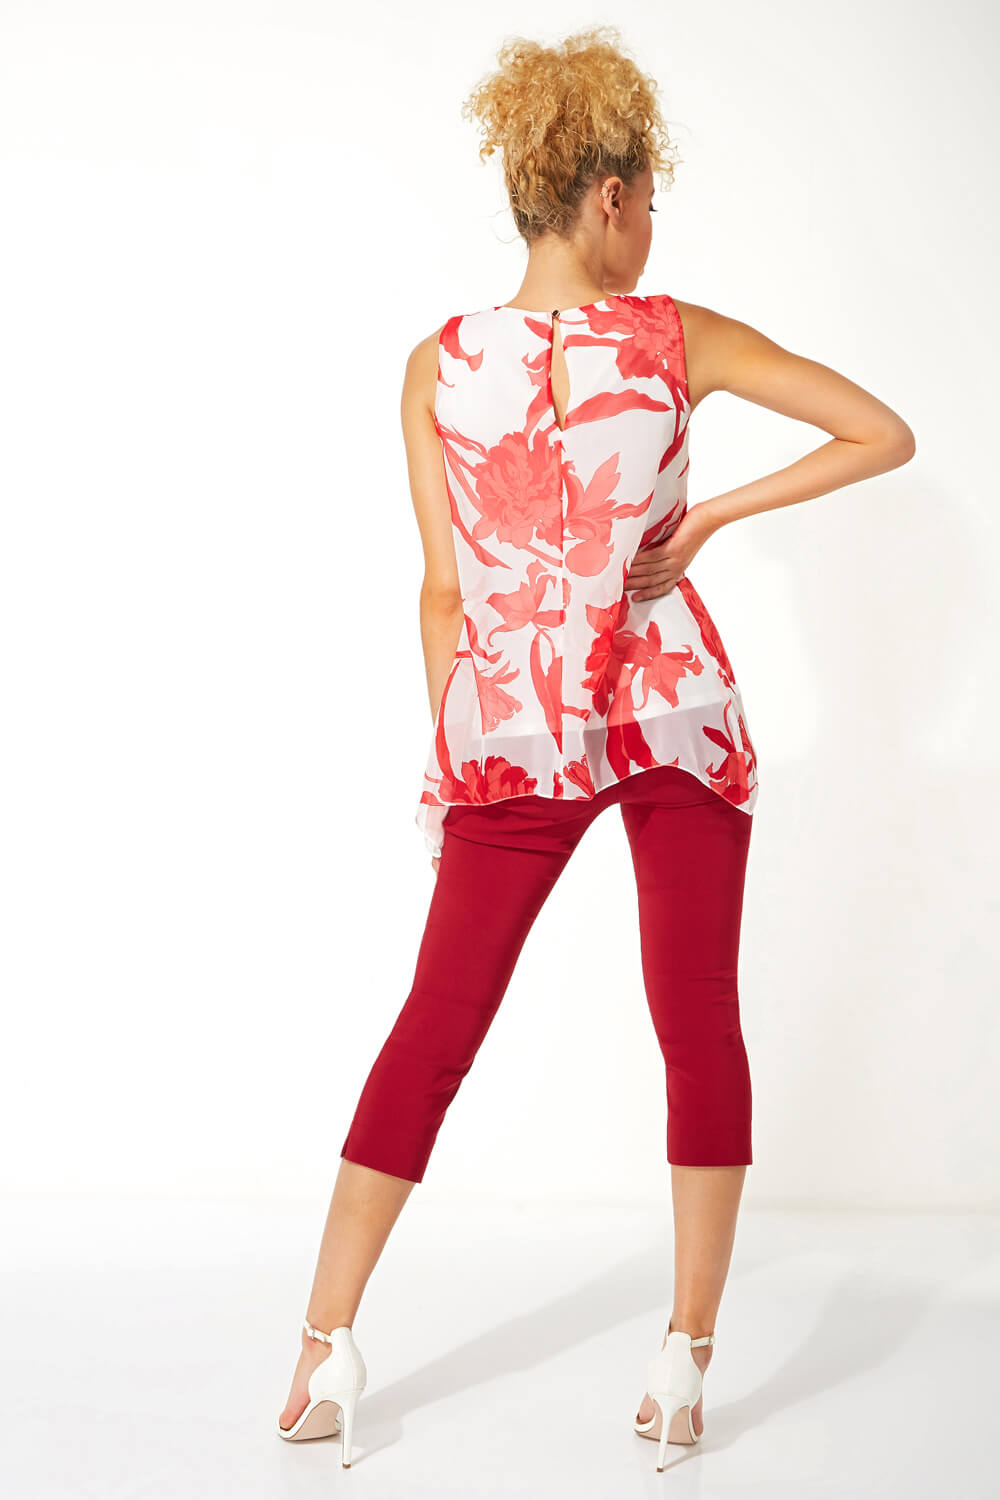 Red Floral Print Sleeveless Top, Image 4 of 4